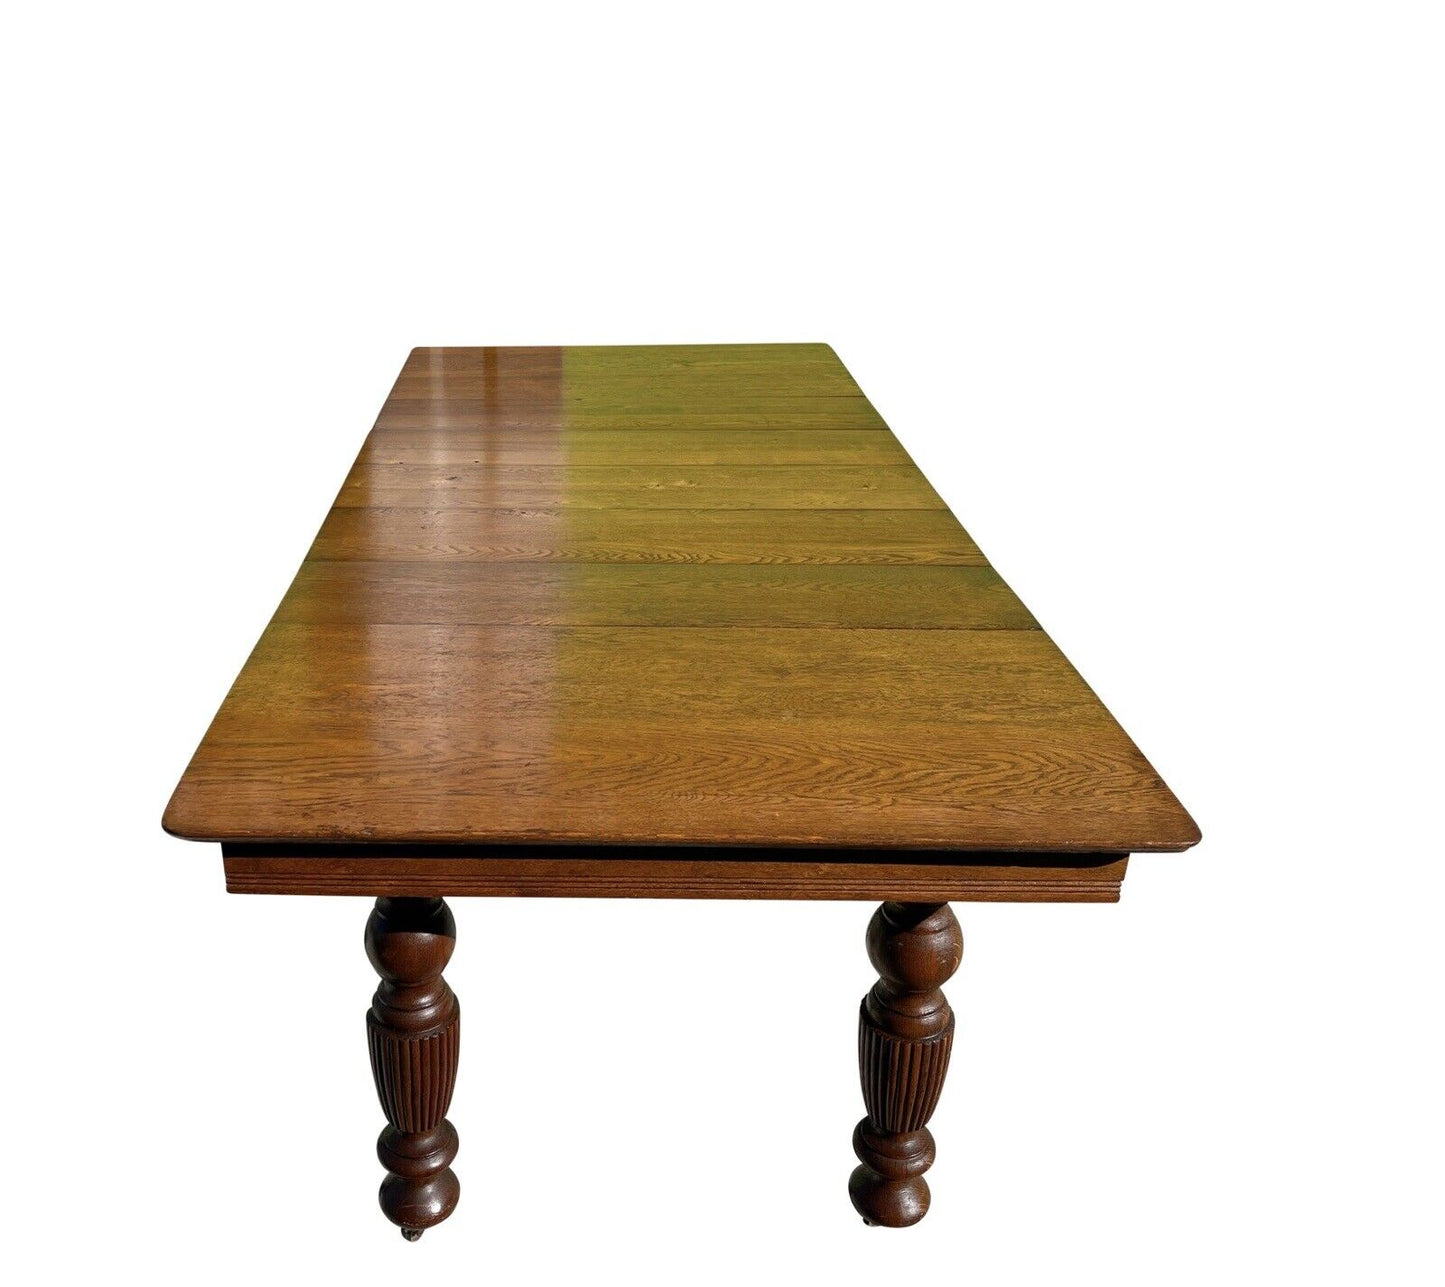 19th C Antique Victorian Oak Dining Table With 5 Leaves - 7.5+ Feet Long